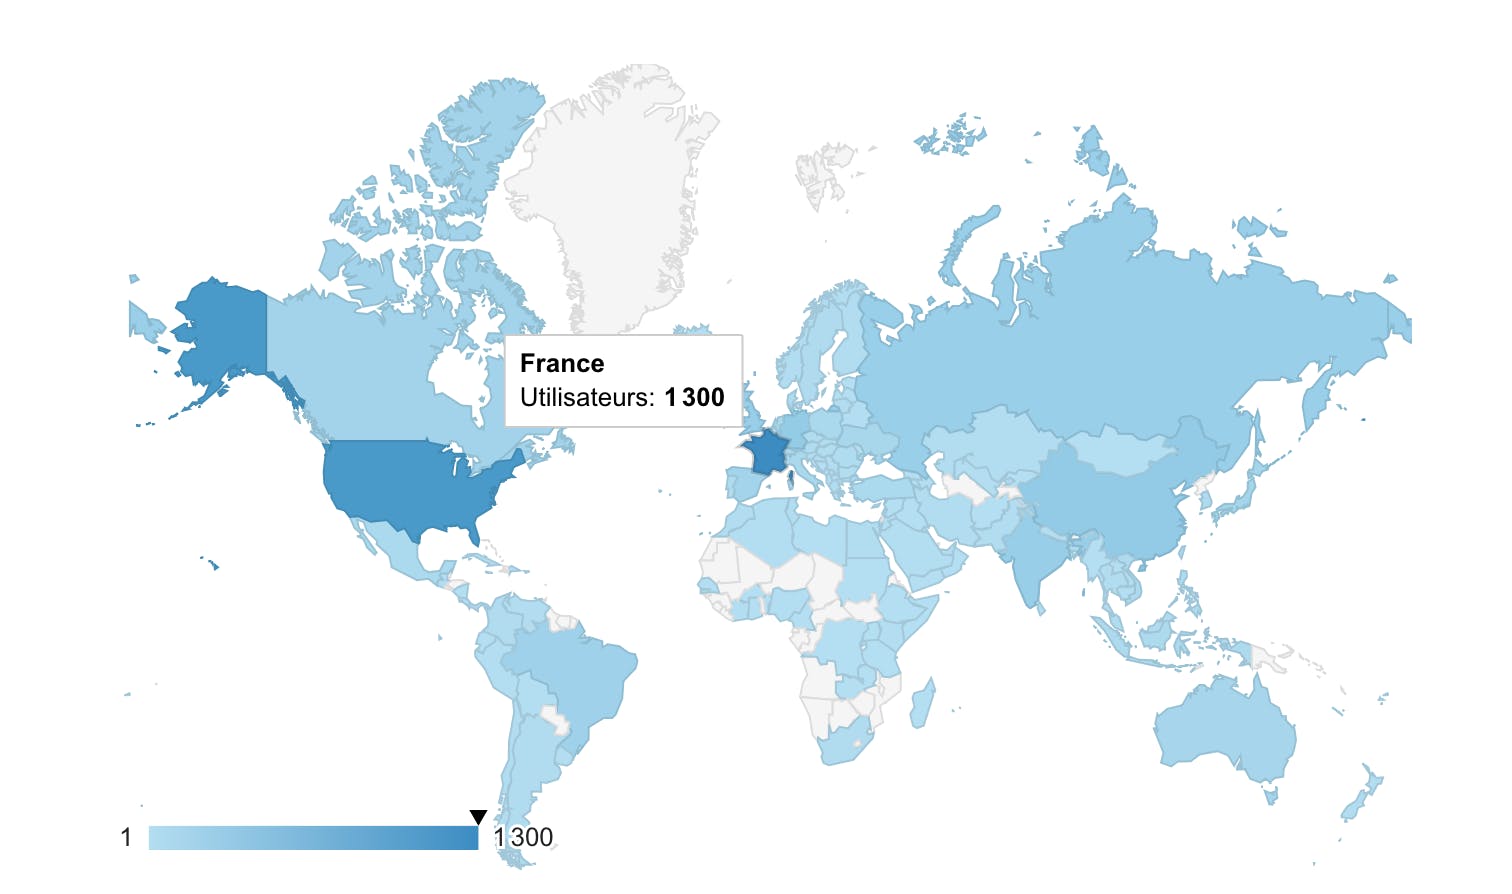 Map of the users of Code Notes in the world